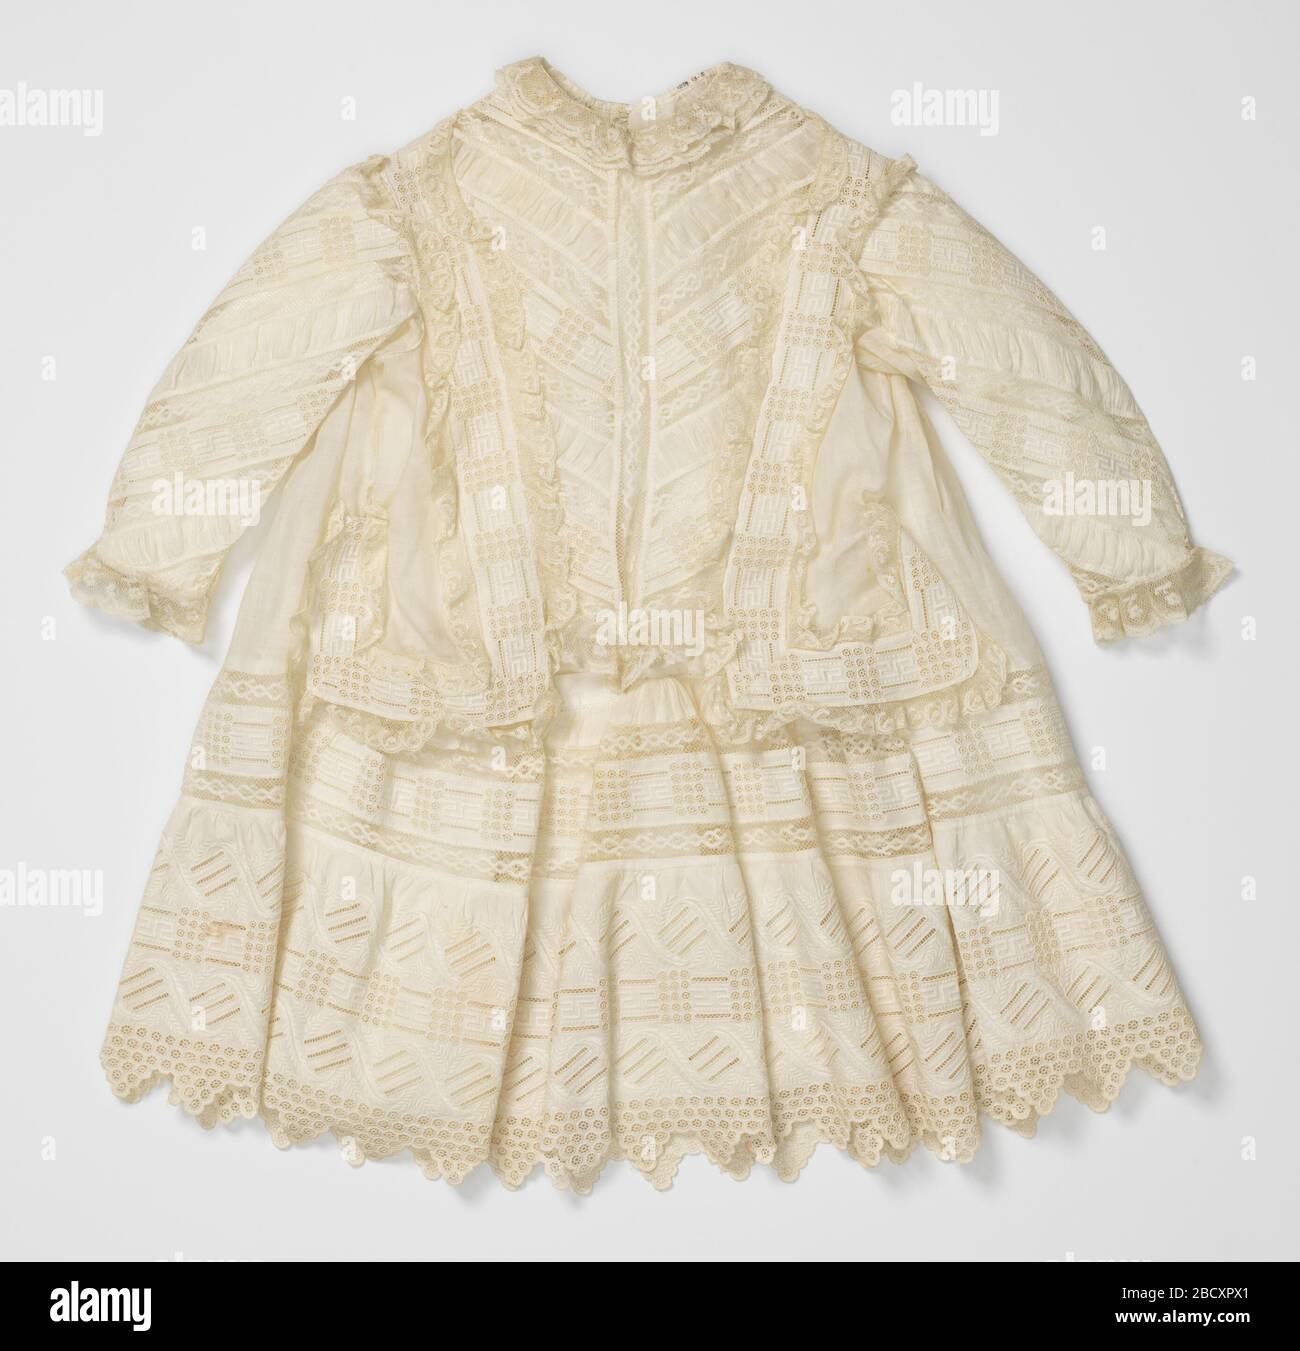 Childs dress. Research in ProgressChild's dress of white cotton. Front of bodice, sleeves and skirt of alternate bands of eyelet embroidery, gathered muslin, and handmade Valenciennes lace. Deep flounce of eyelet embroidery at bottom of skirt. Childs dress Stock Photo